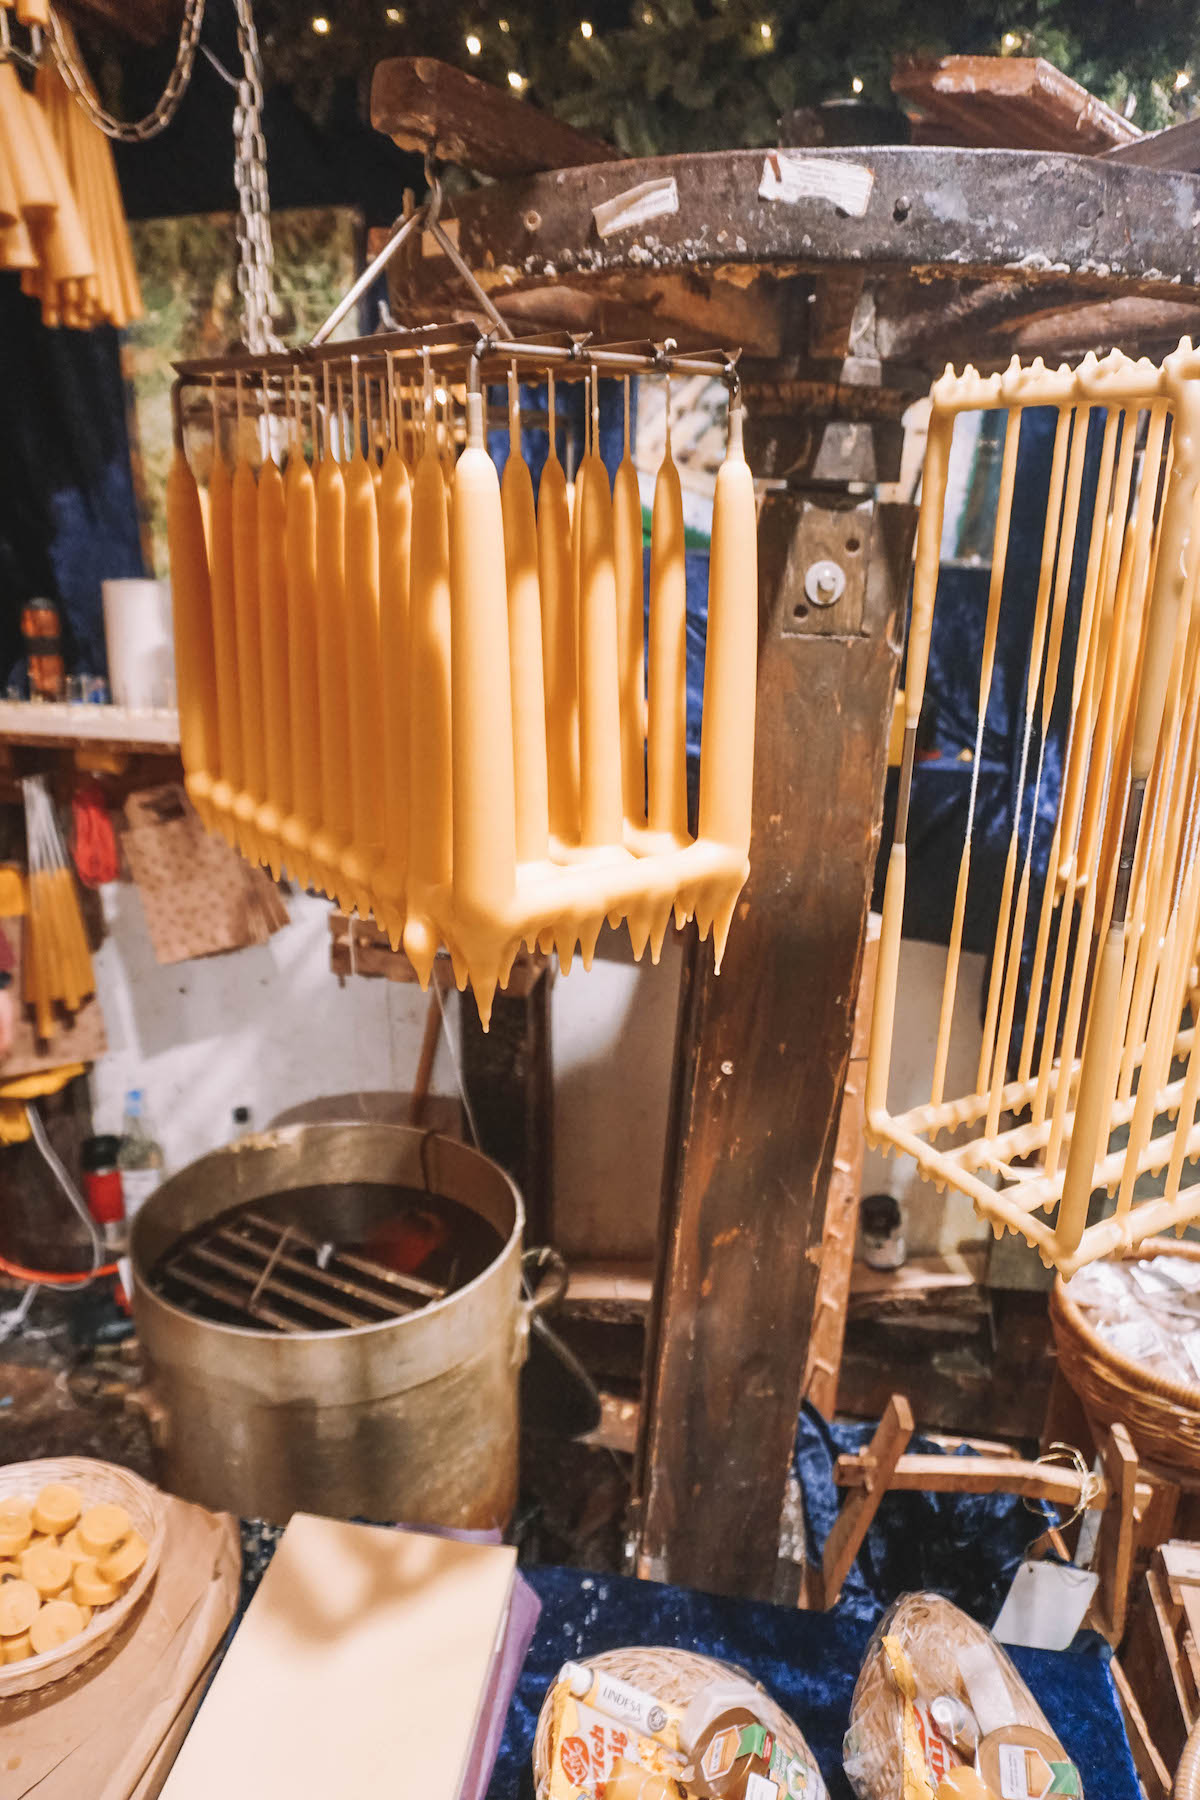 Beeswax candles in the making at Bonn's Christmas market